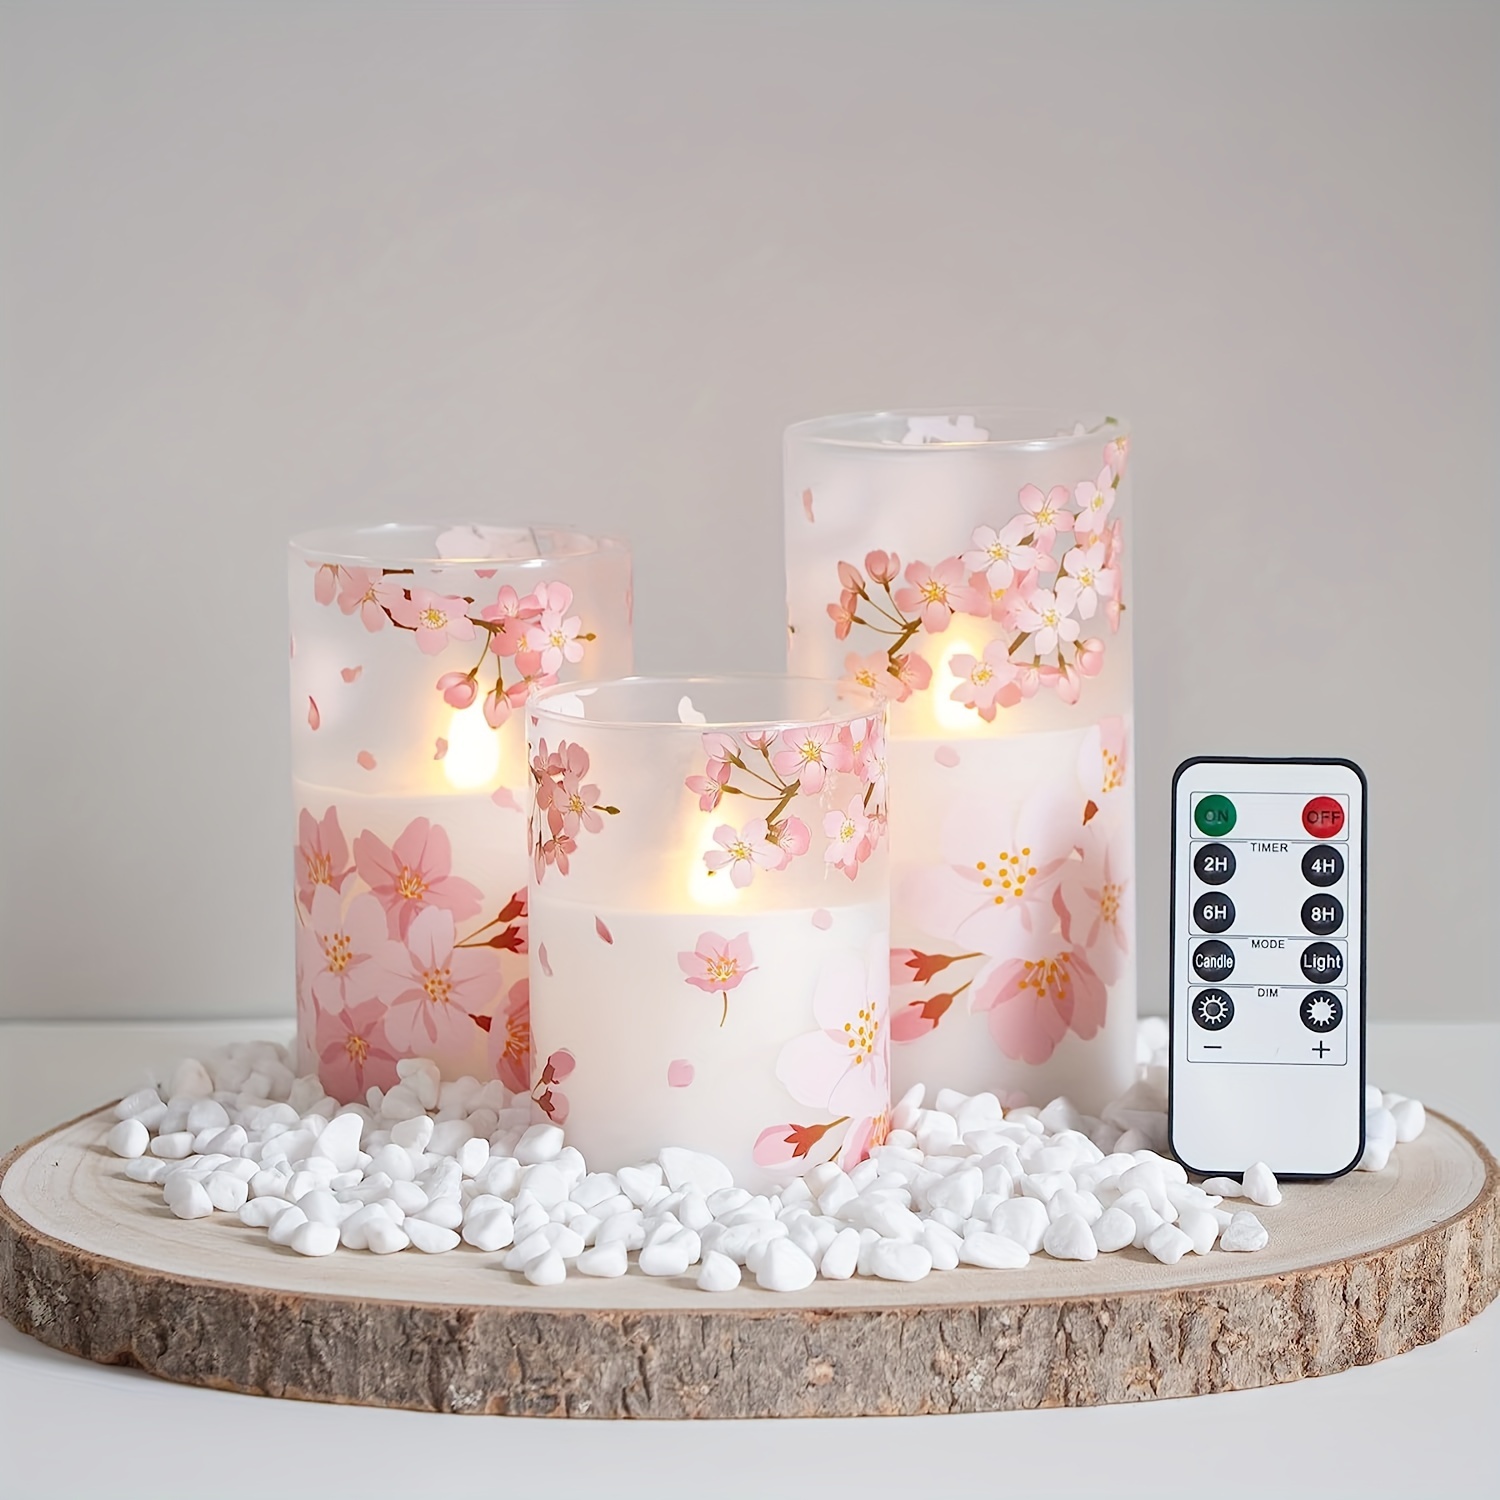 Viewamoon White Plum Candle Battery Operater Set of 4 Color Changing  Candles Ready to Use Flameless Candles with Various Patterns for Tea